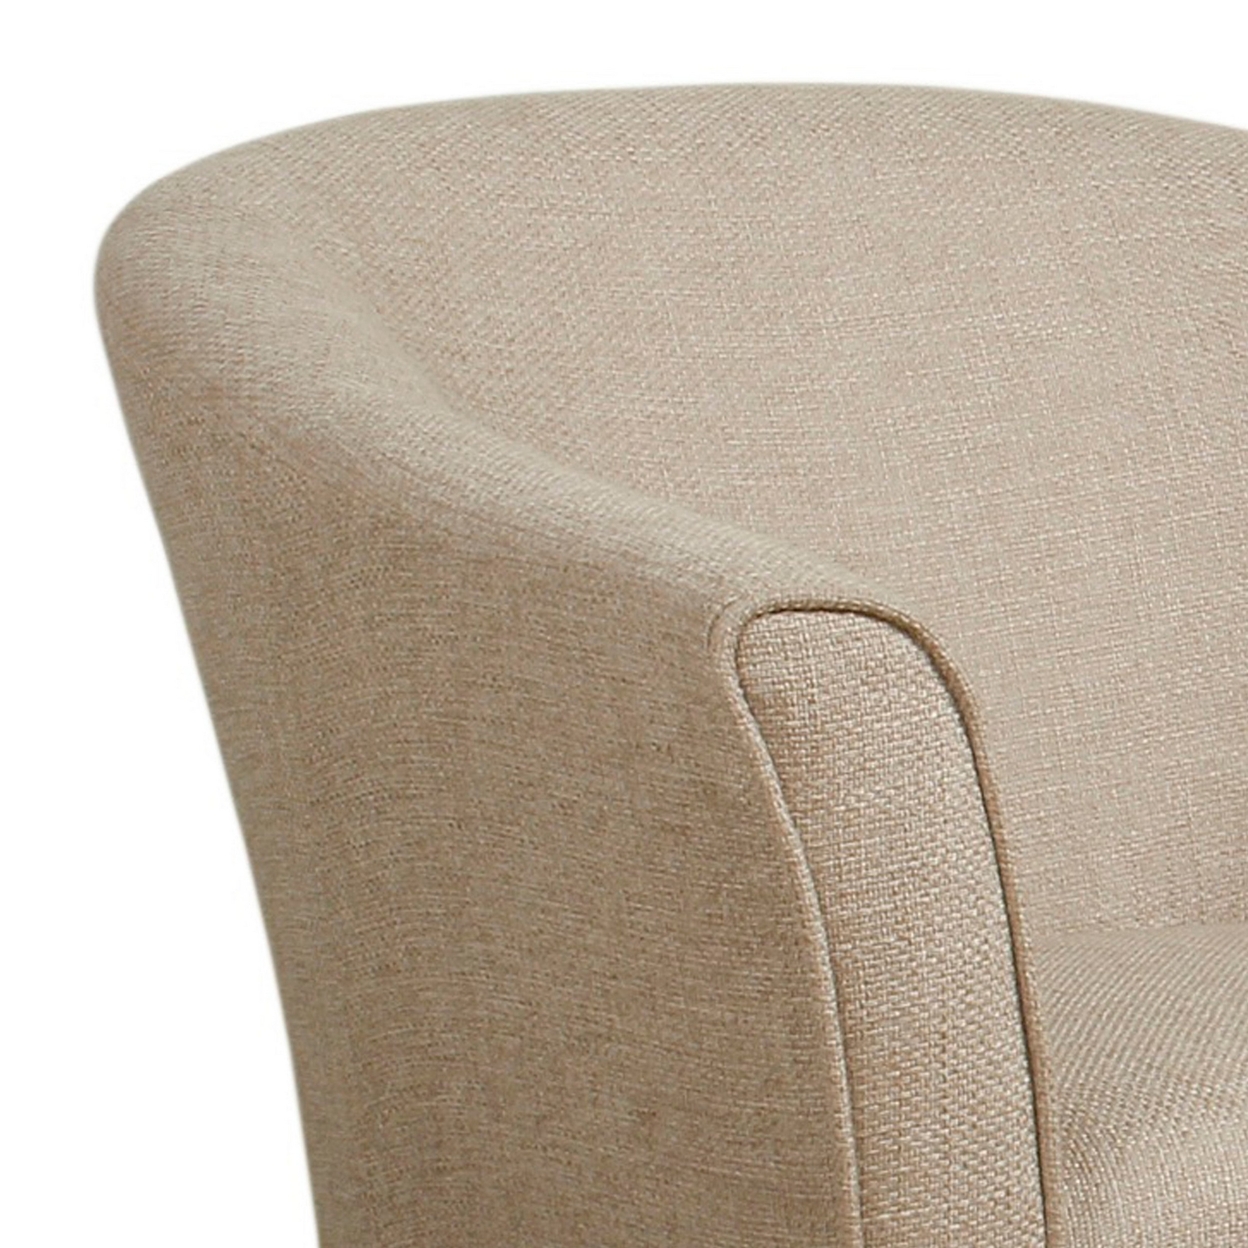 Fabric Upholstered Wooden Accent Chair With Barrel Style Back, Cream And Brown- Saltoro Sherpi